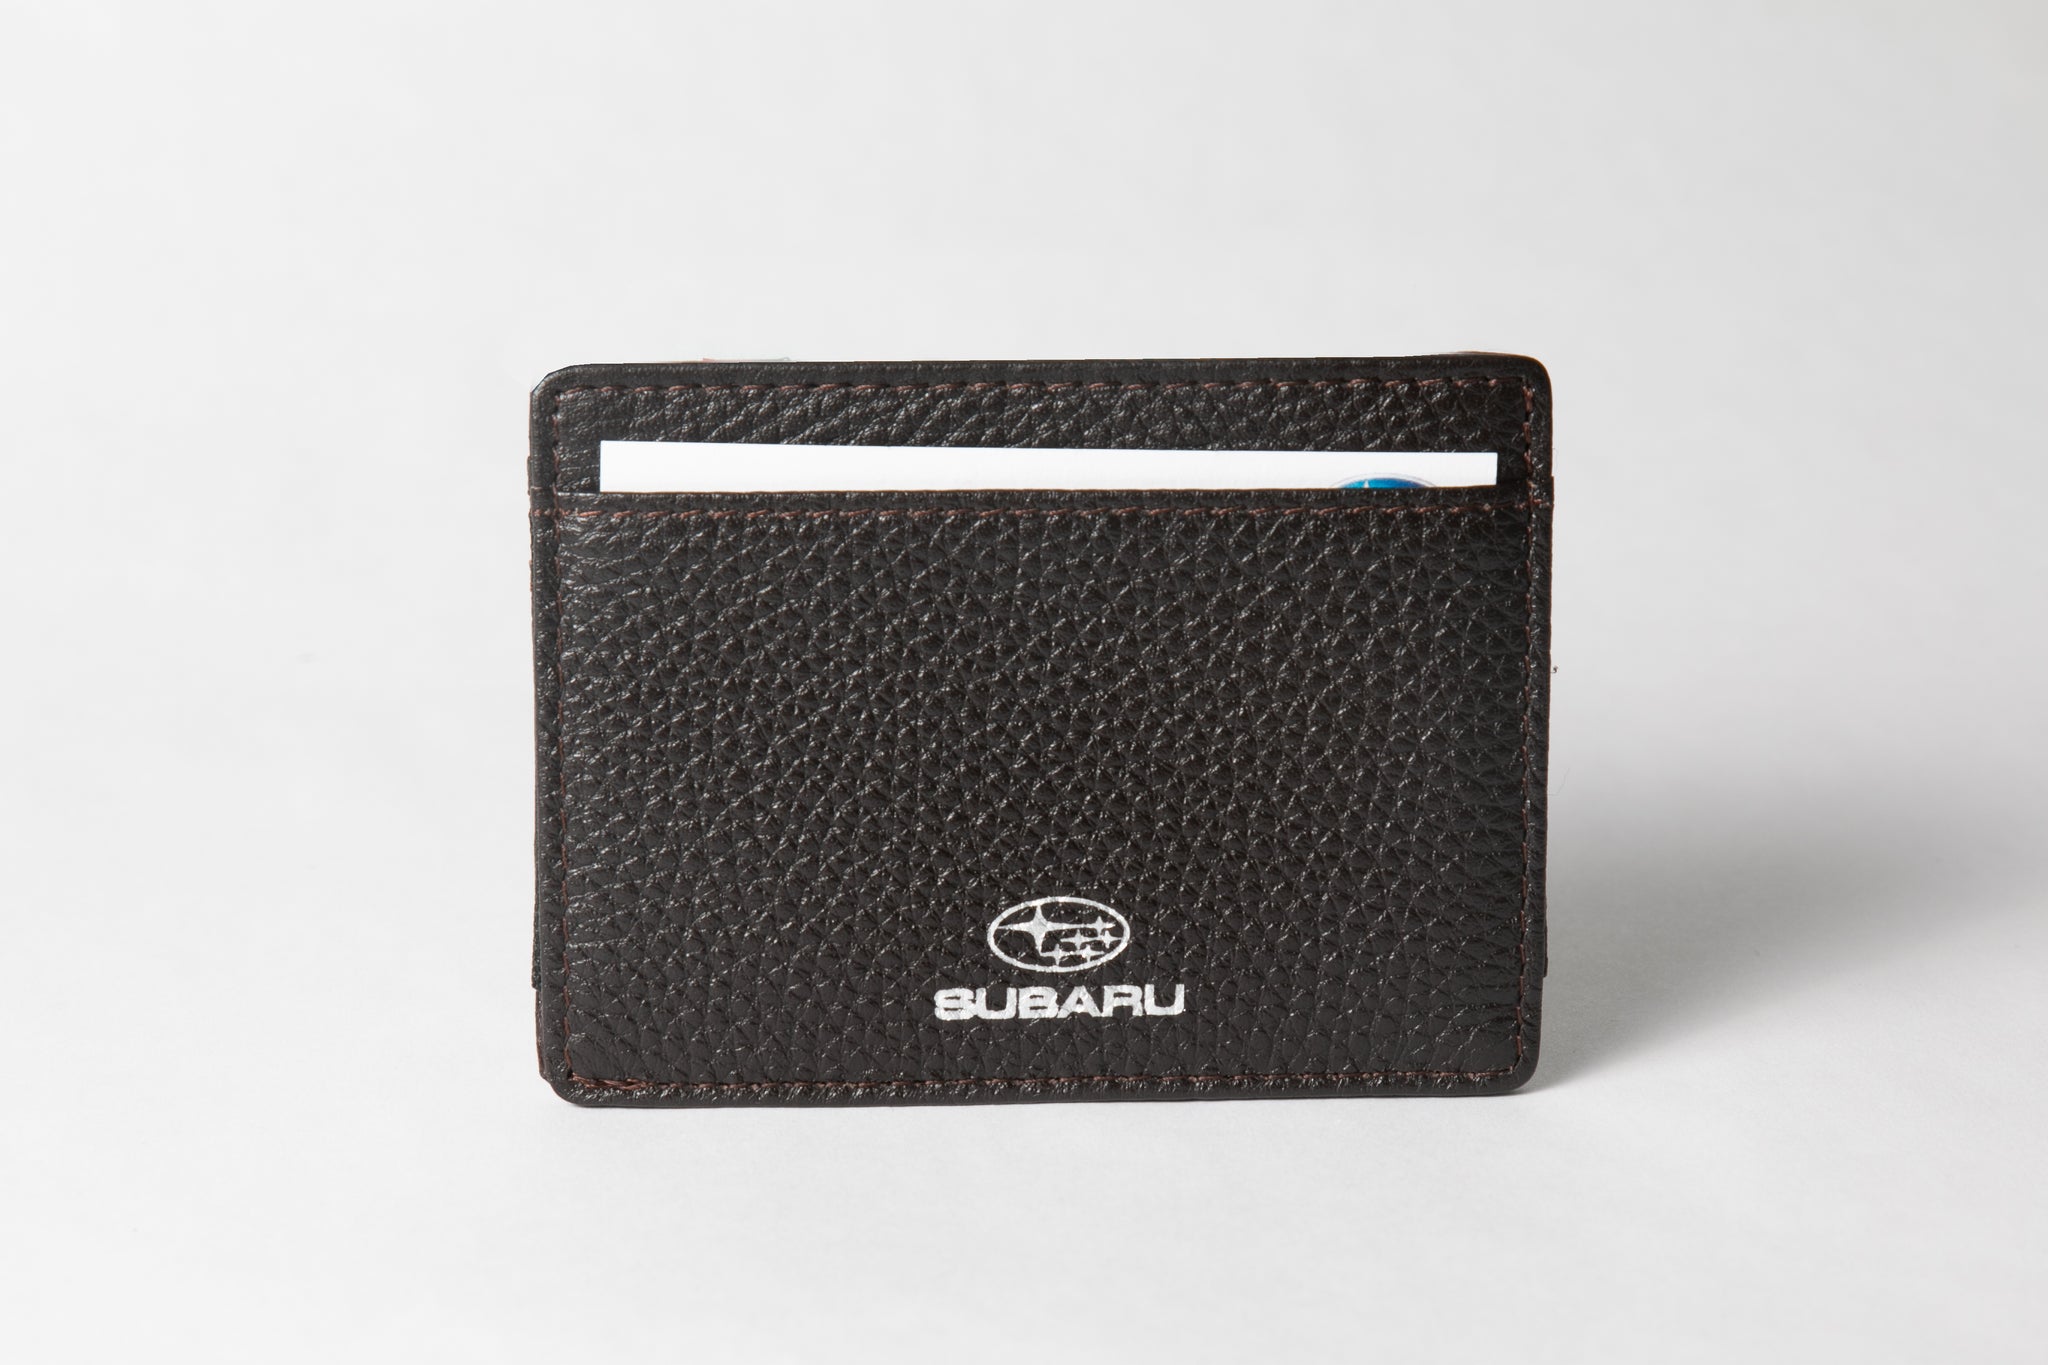 Subaru Leather Two-Tier Card Holder